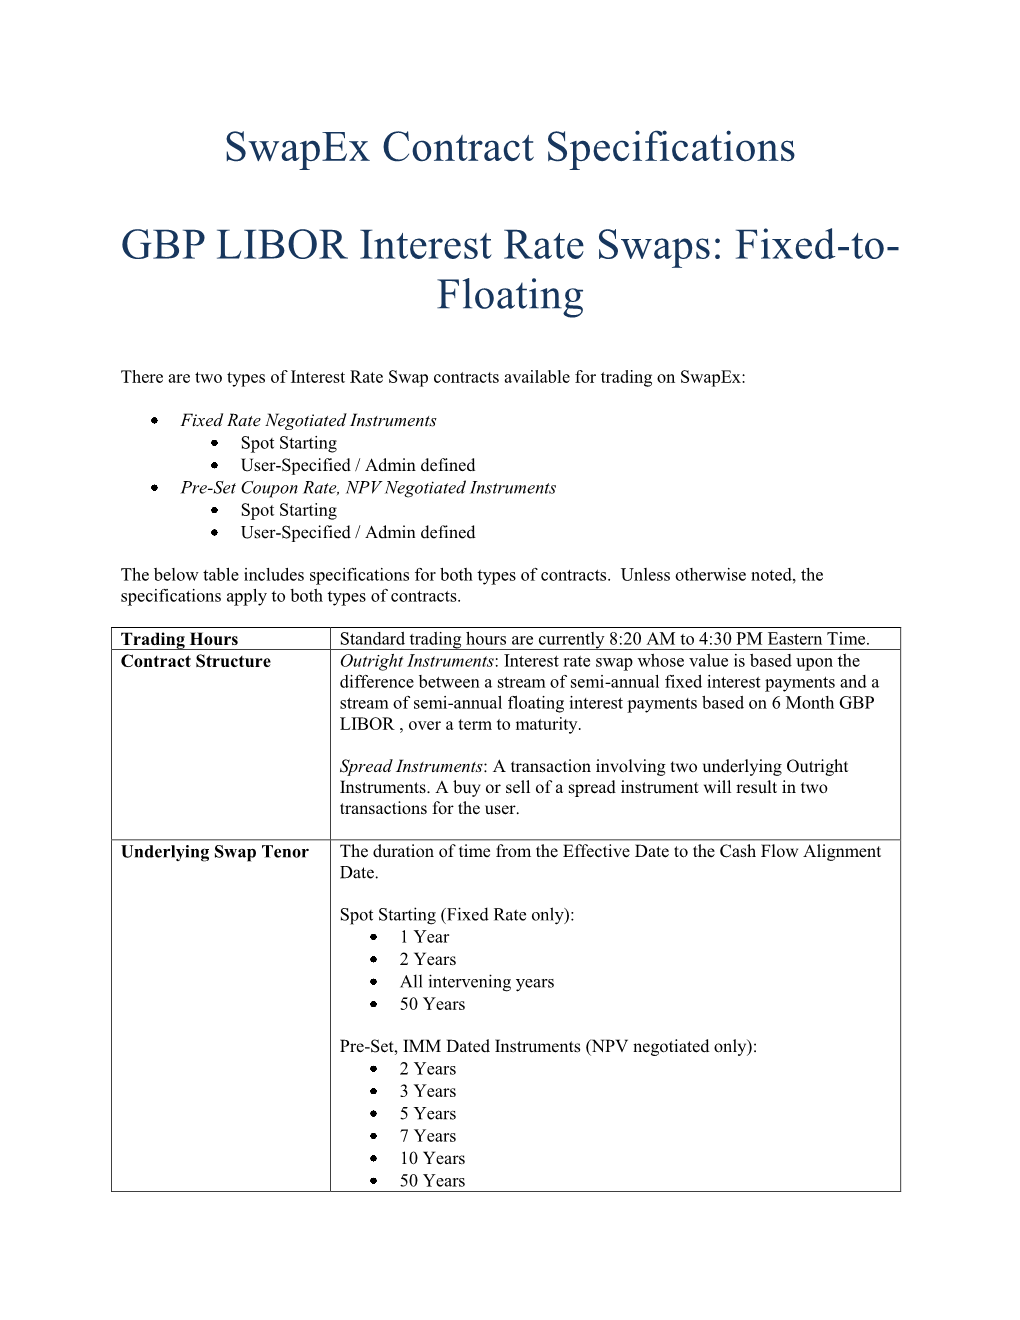 Swapex Contract Specifications GBP LIBOR Interest Rate Swaps: Fixed